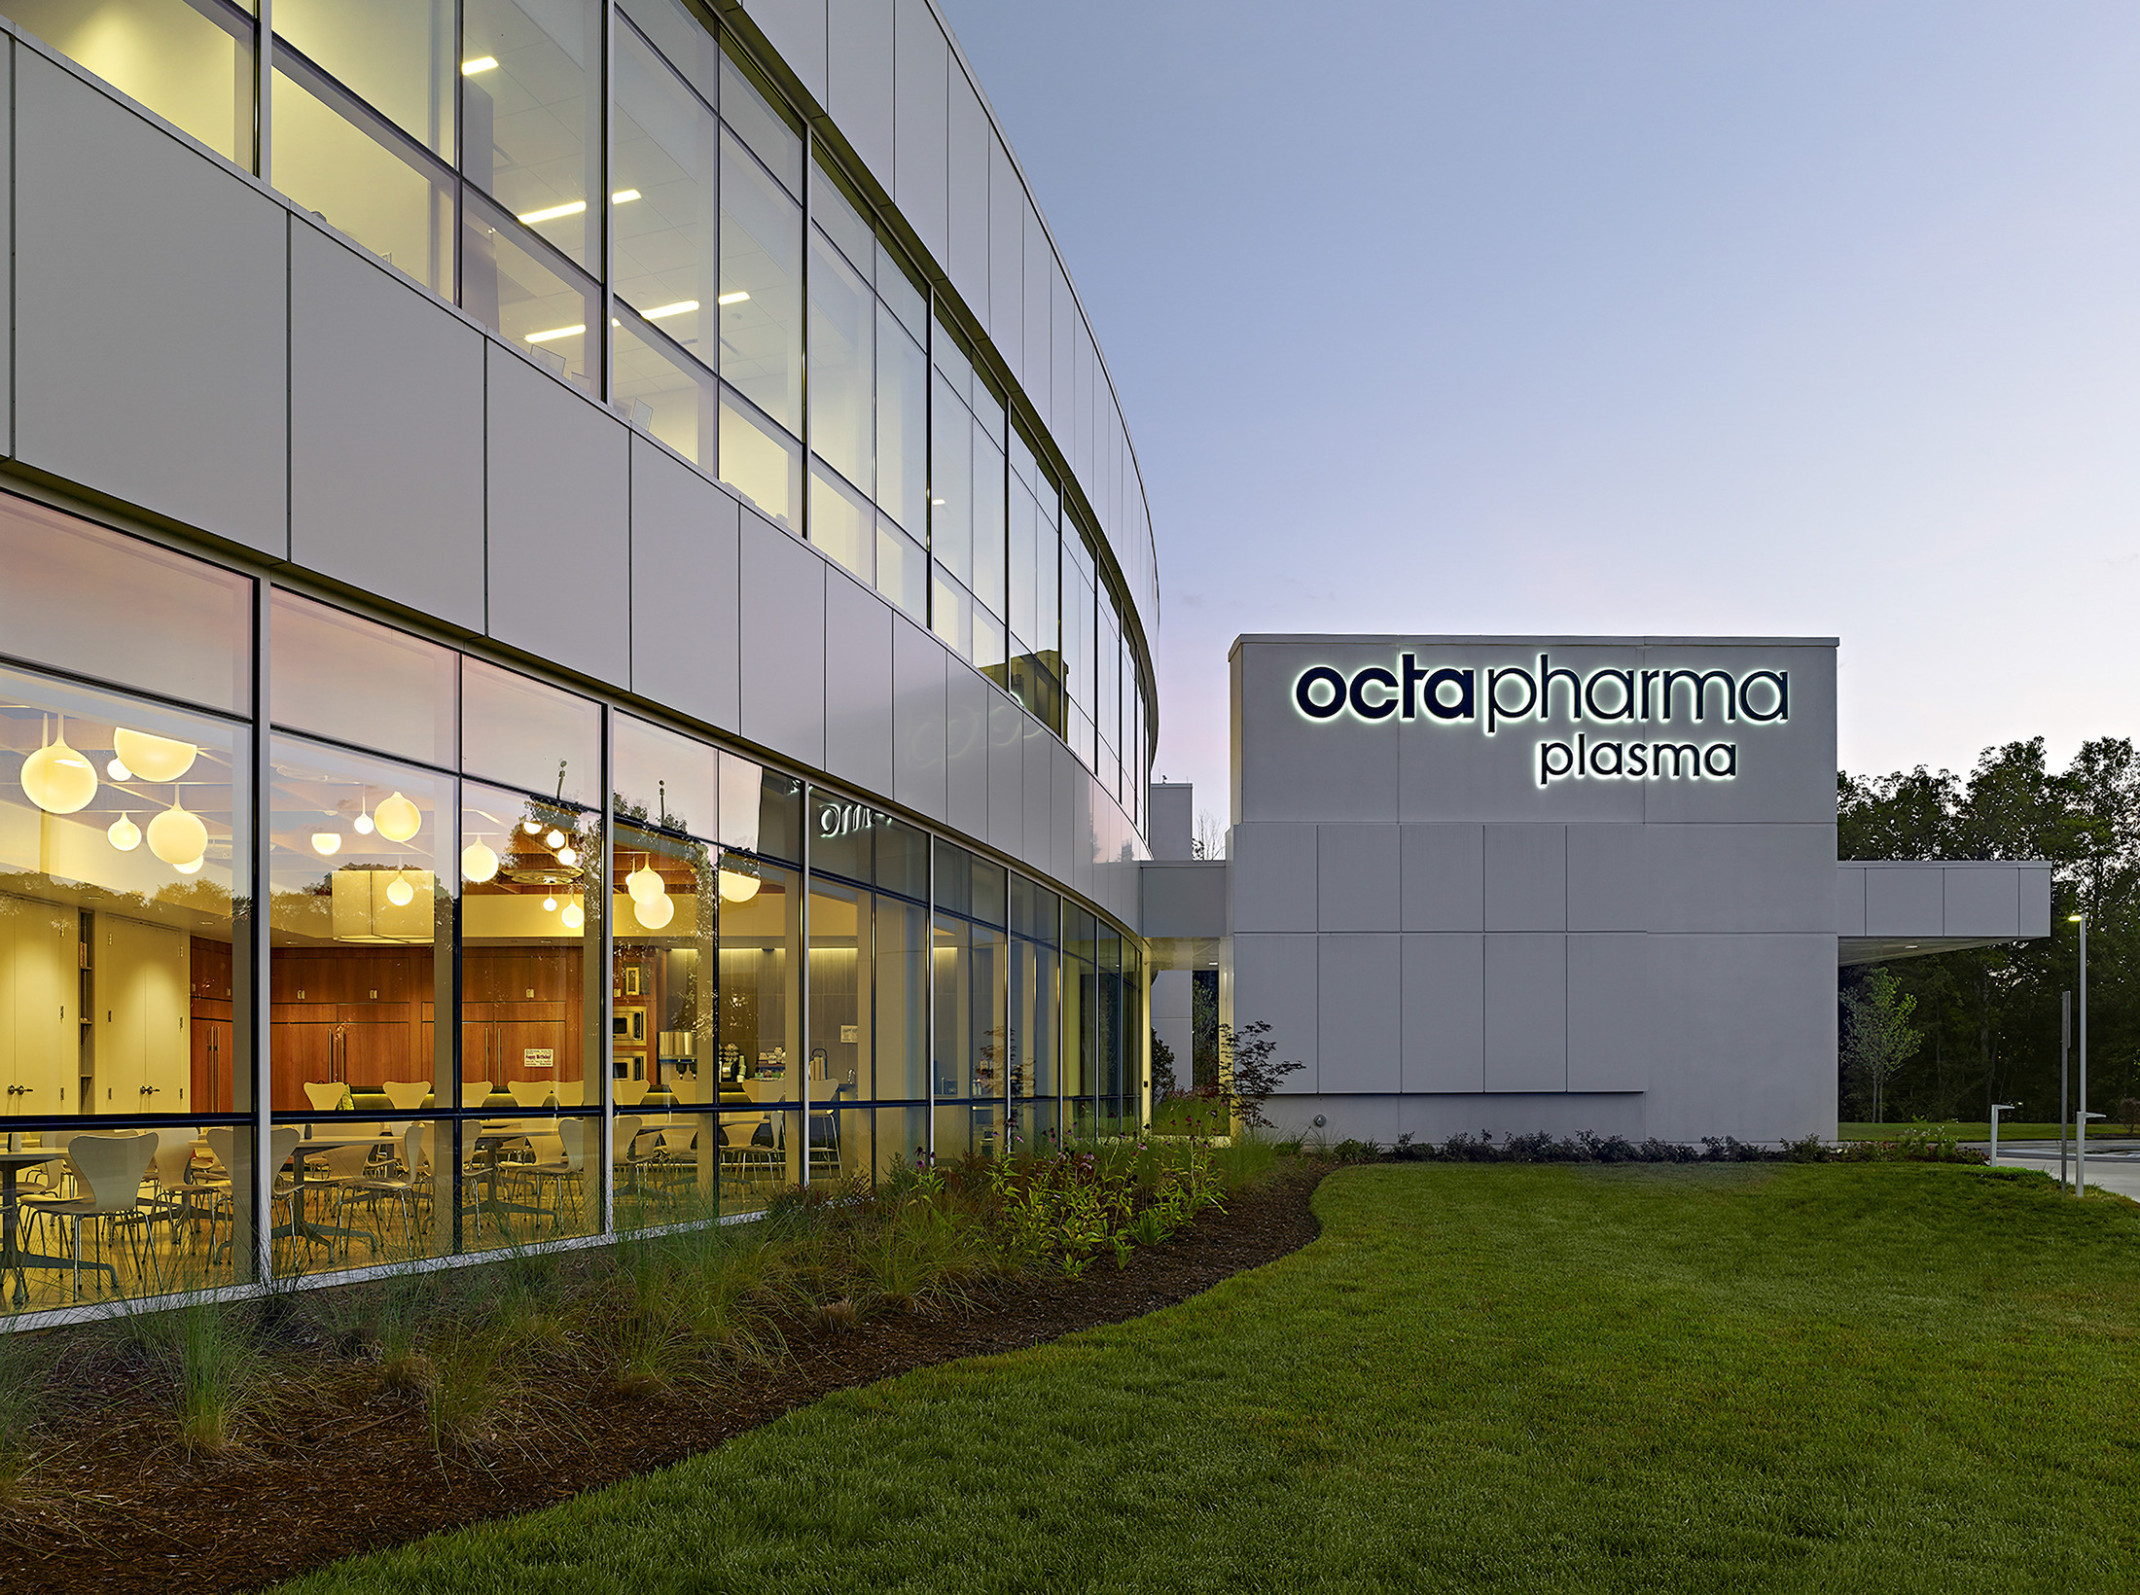 evening view of a double height glass facade with Octapharma logo on the far building wall